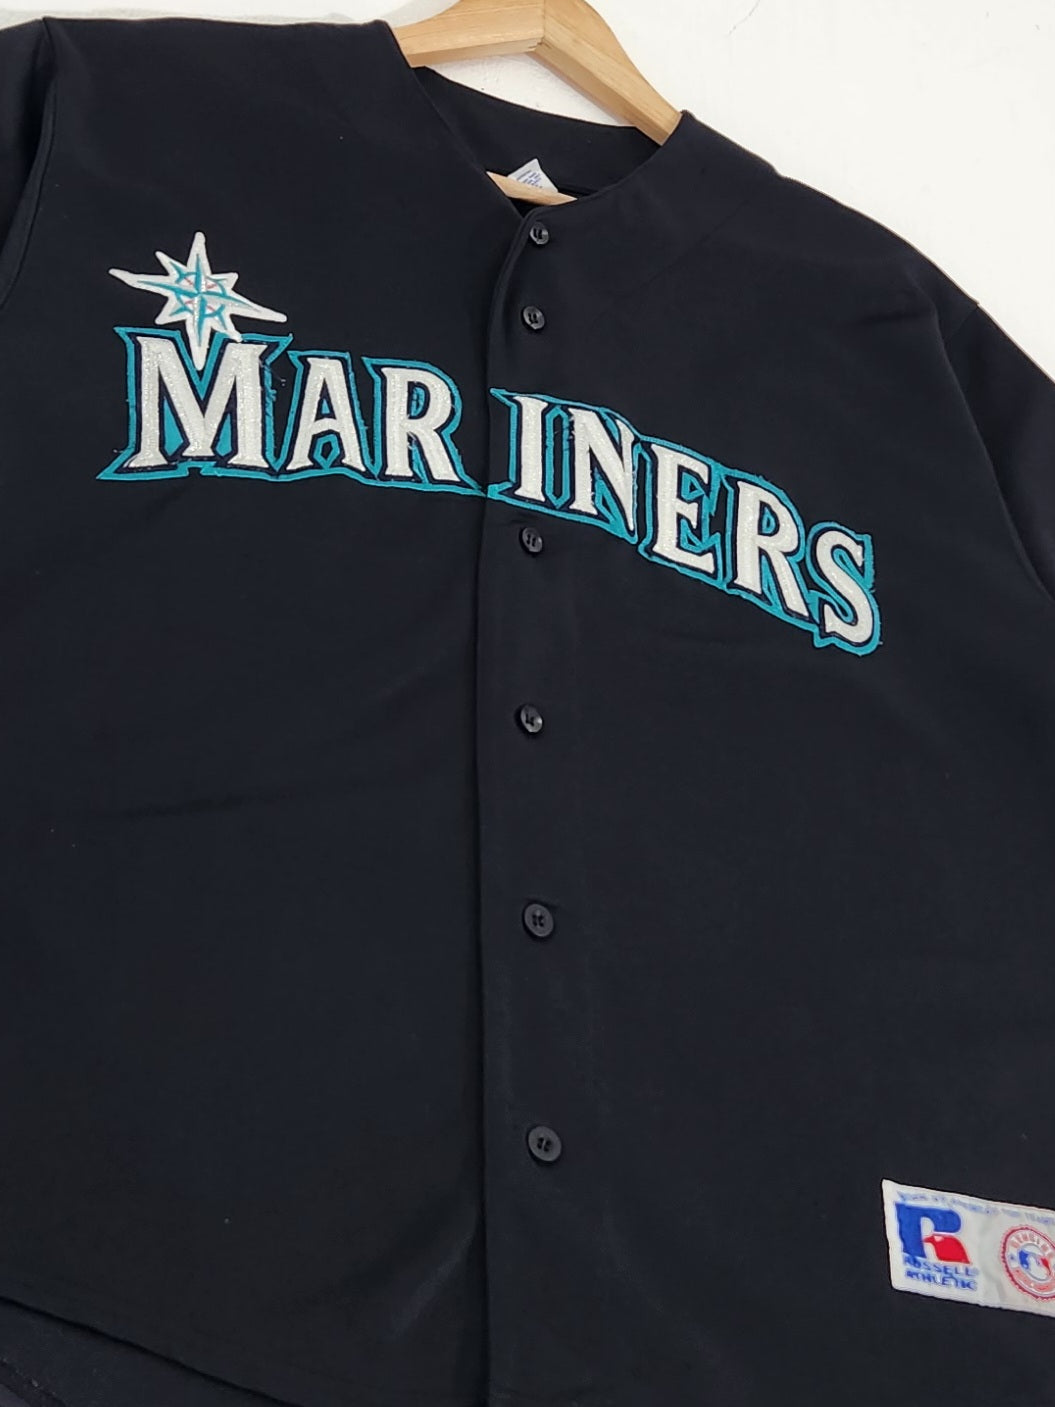 all black mariners jersey